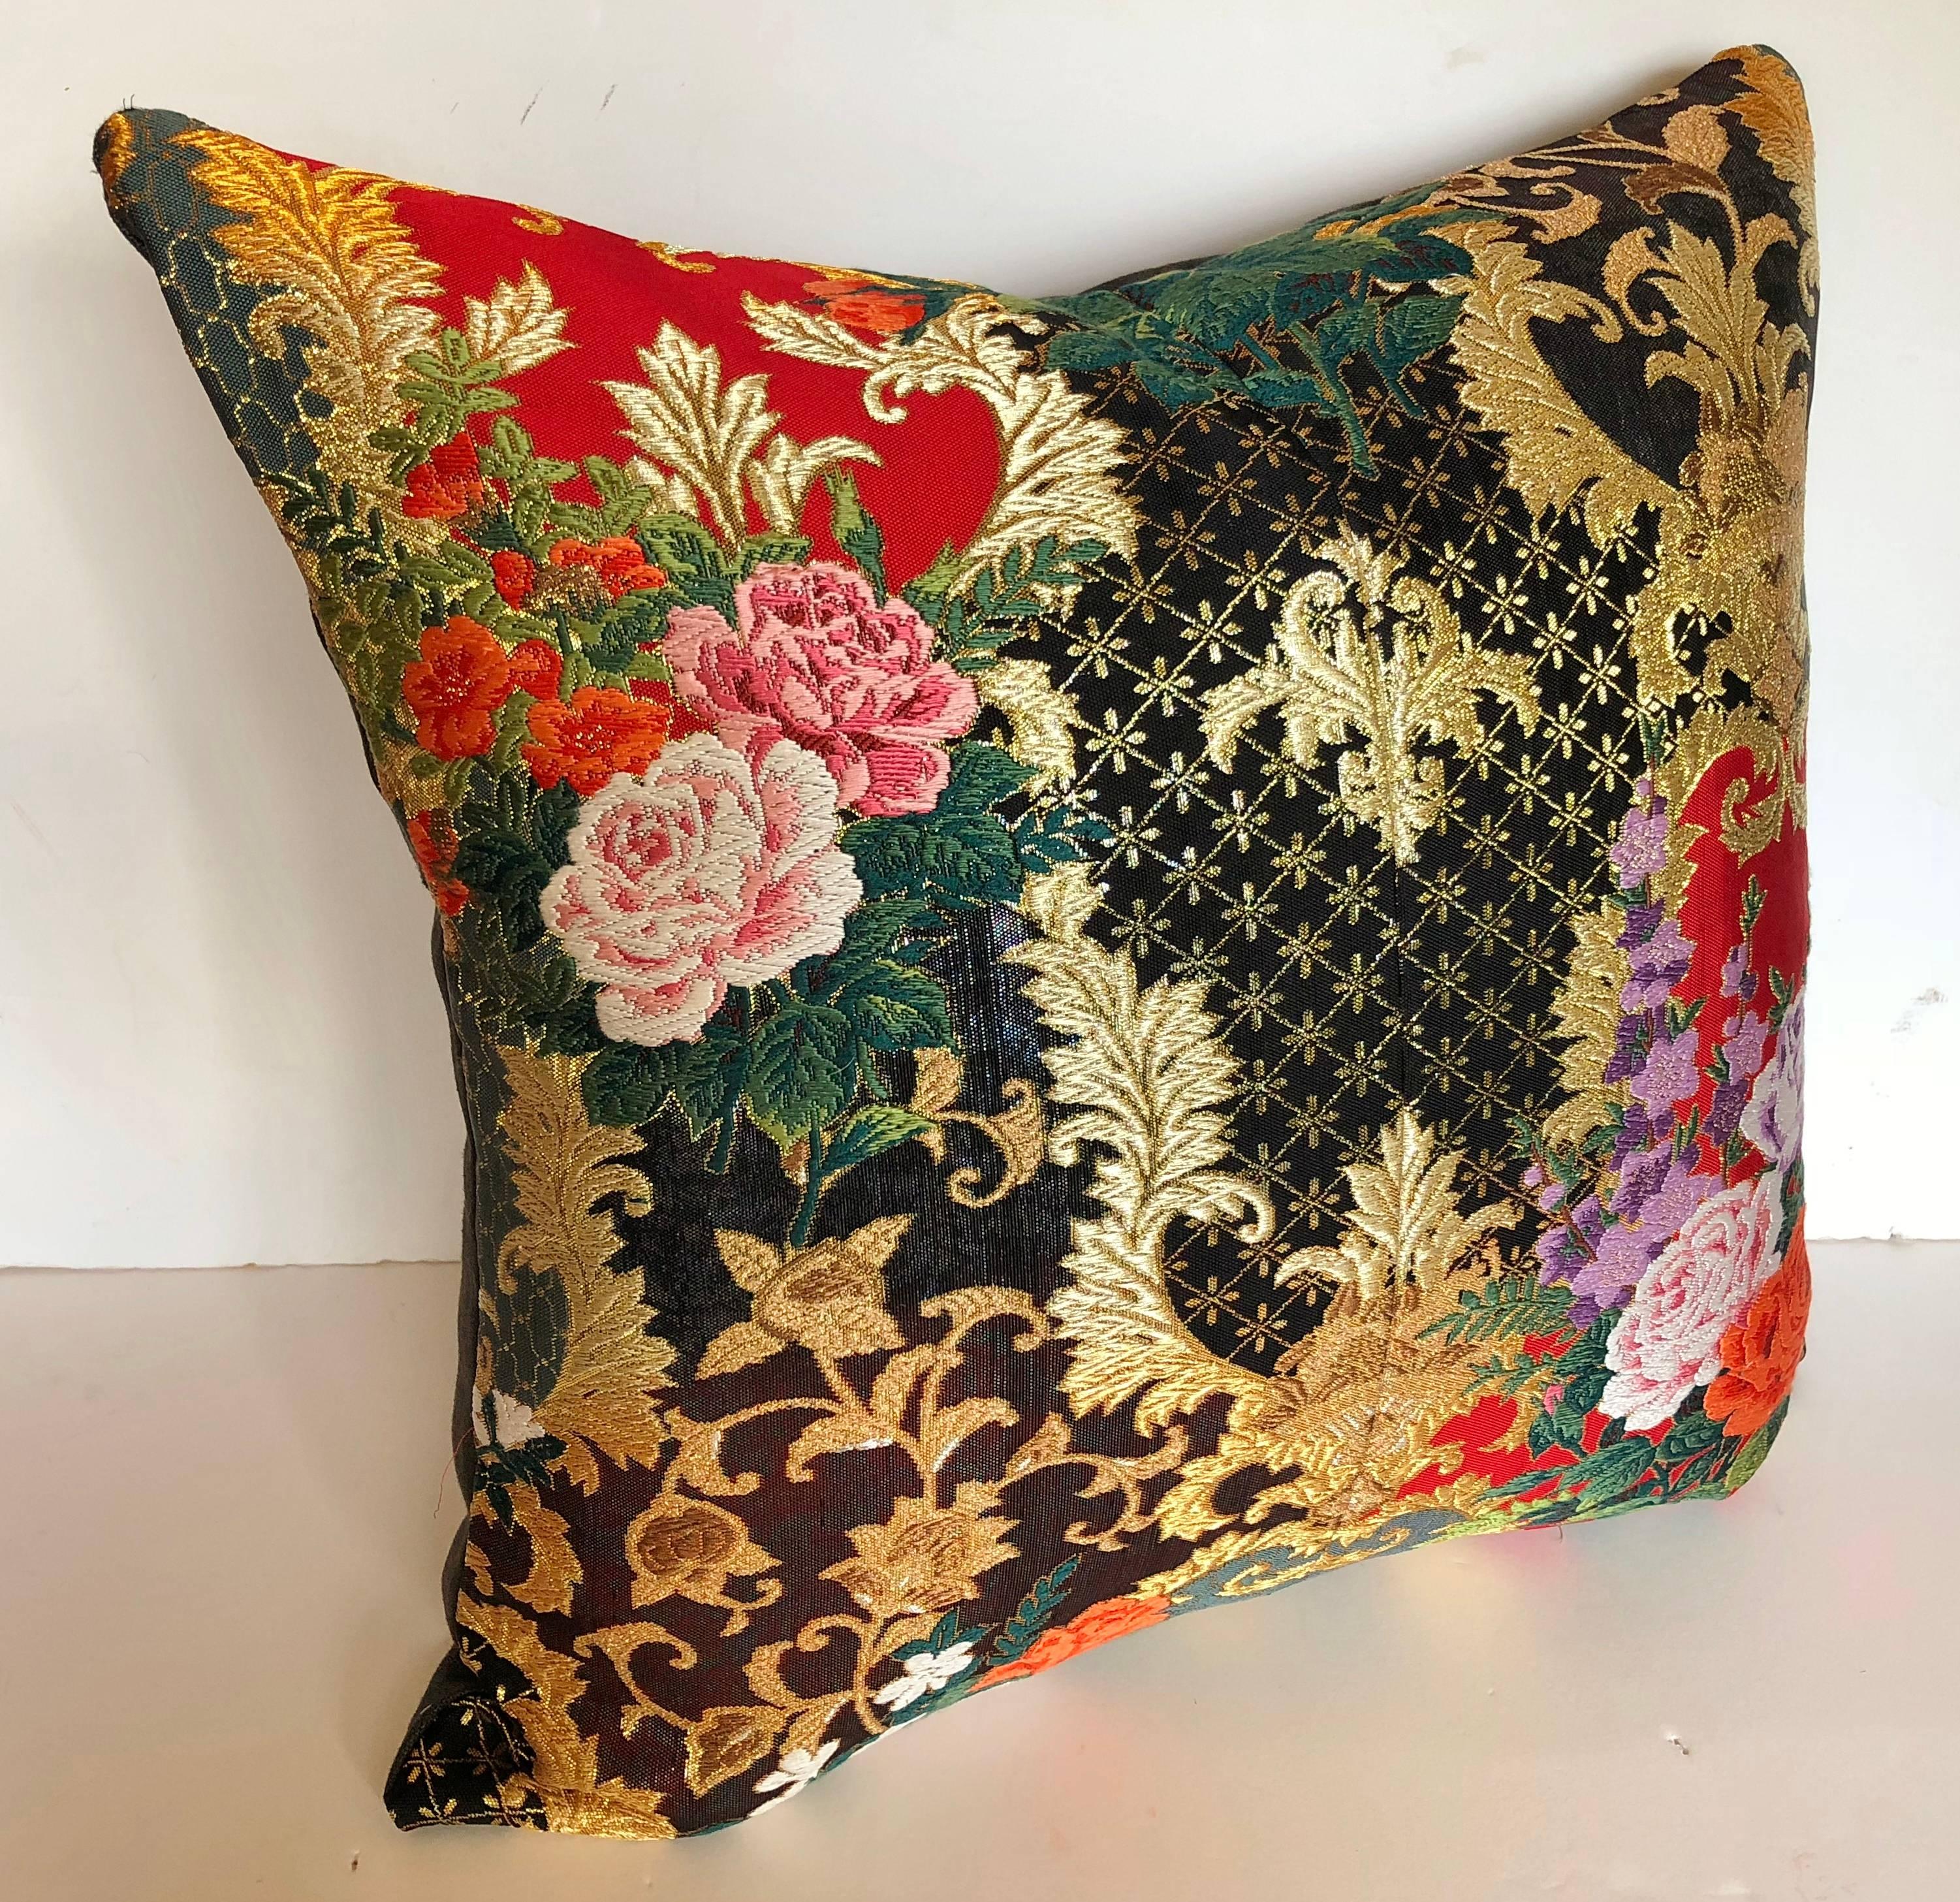 Custom pillow cut from a vintage silk Japanese Uchikake, the traditional wedding kimono. Japanese silk textiles are woven in 14